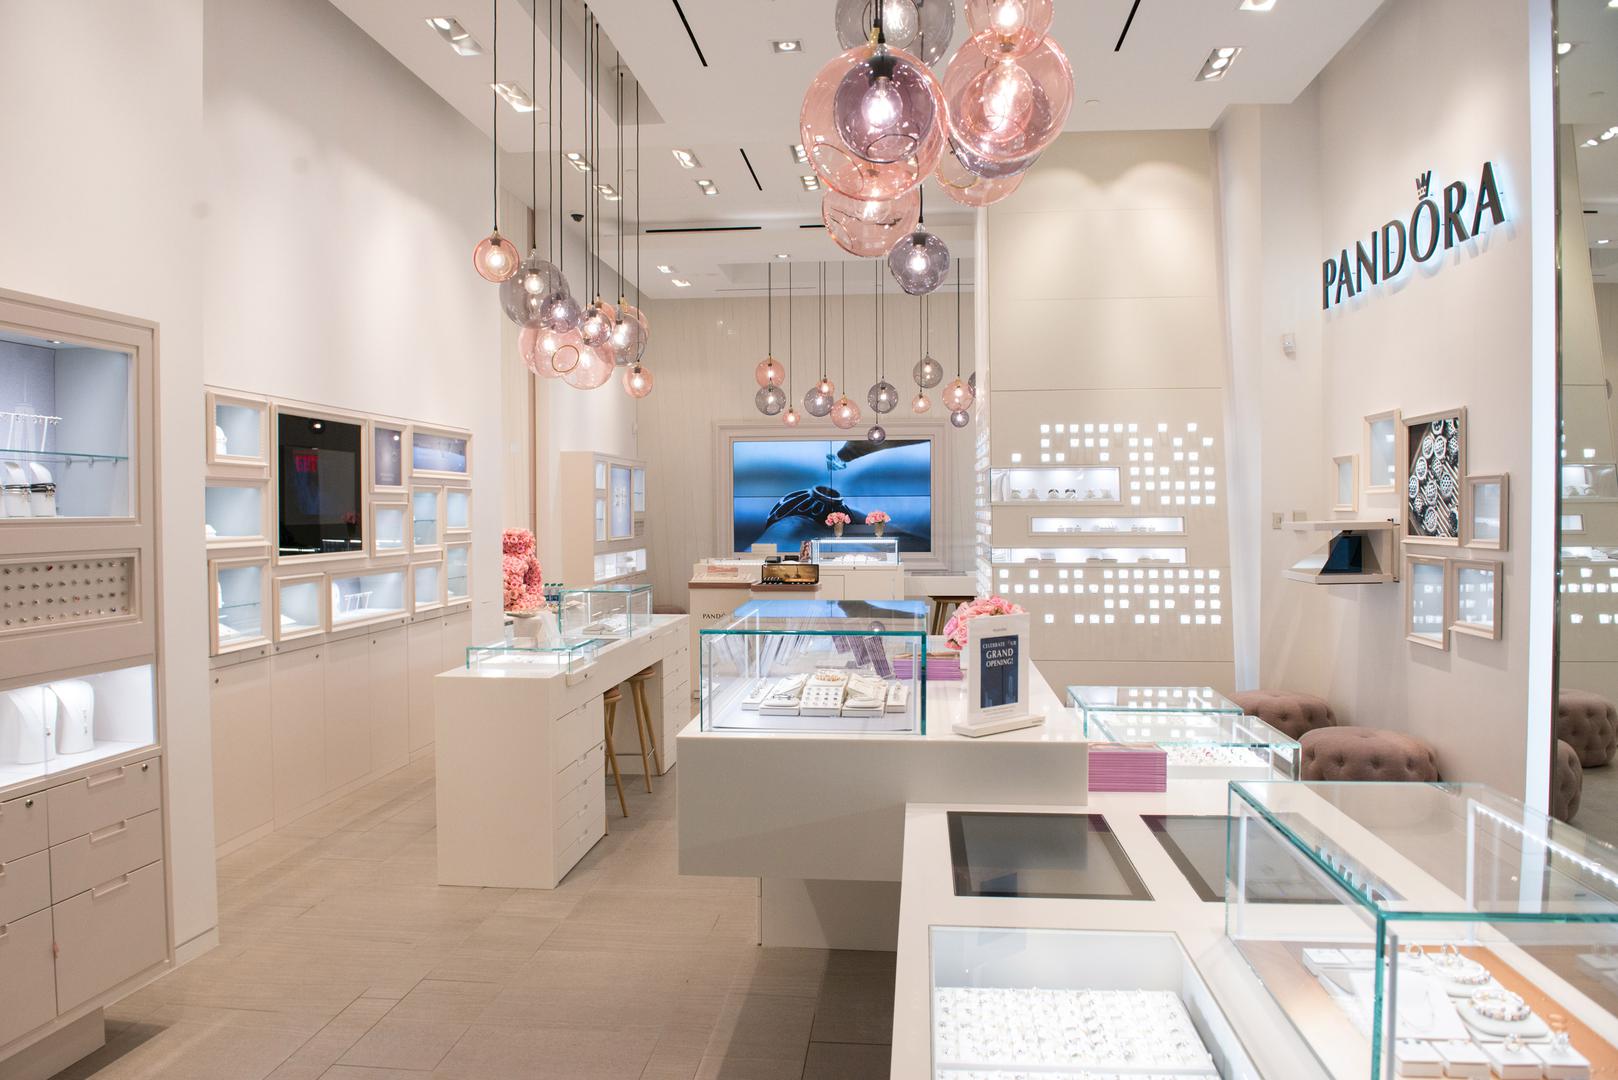 A Pandora jewelry store opening in August 2016 in New York, US. 